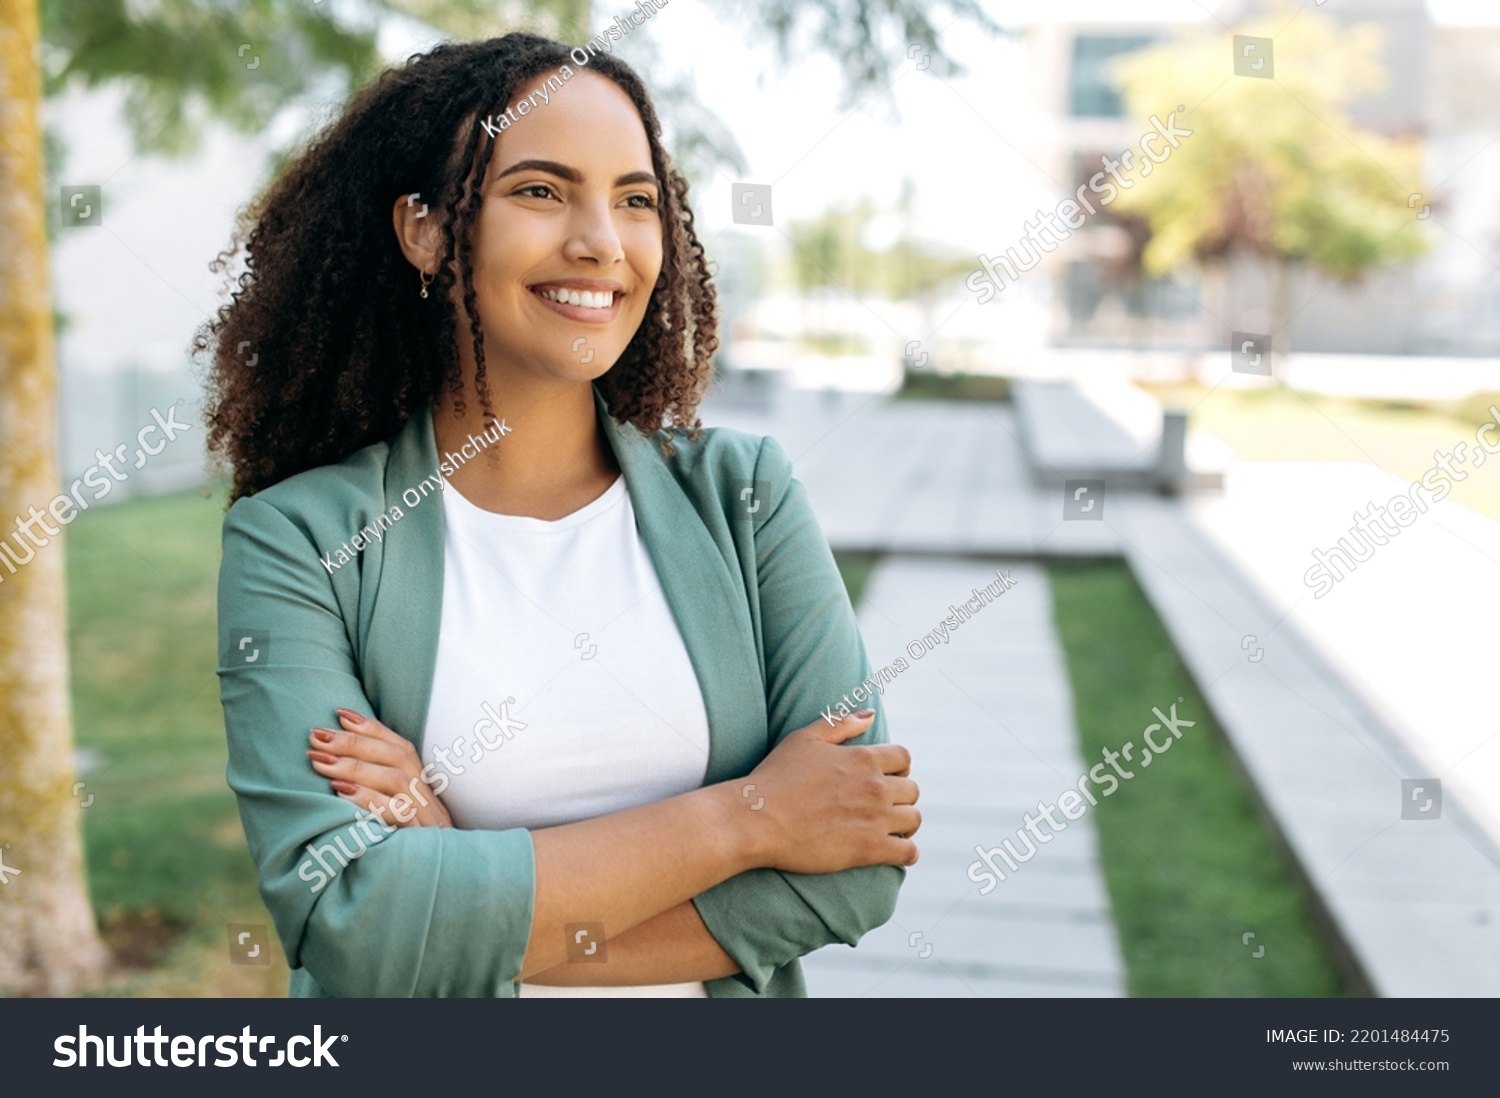 Portrait of lovely positive confident successful brazilian or latino woman with curly hair, business lady, in stylish elegant clothes, stands outdoors with arms crossed, looking ahead, smiles friendly #2201484475